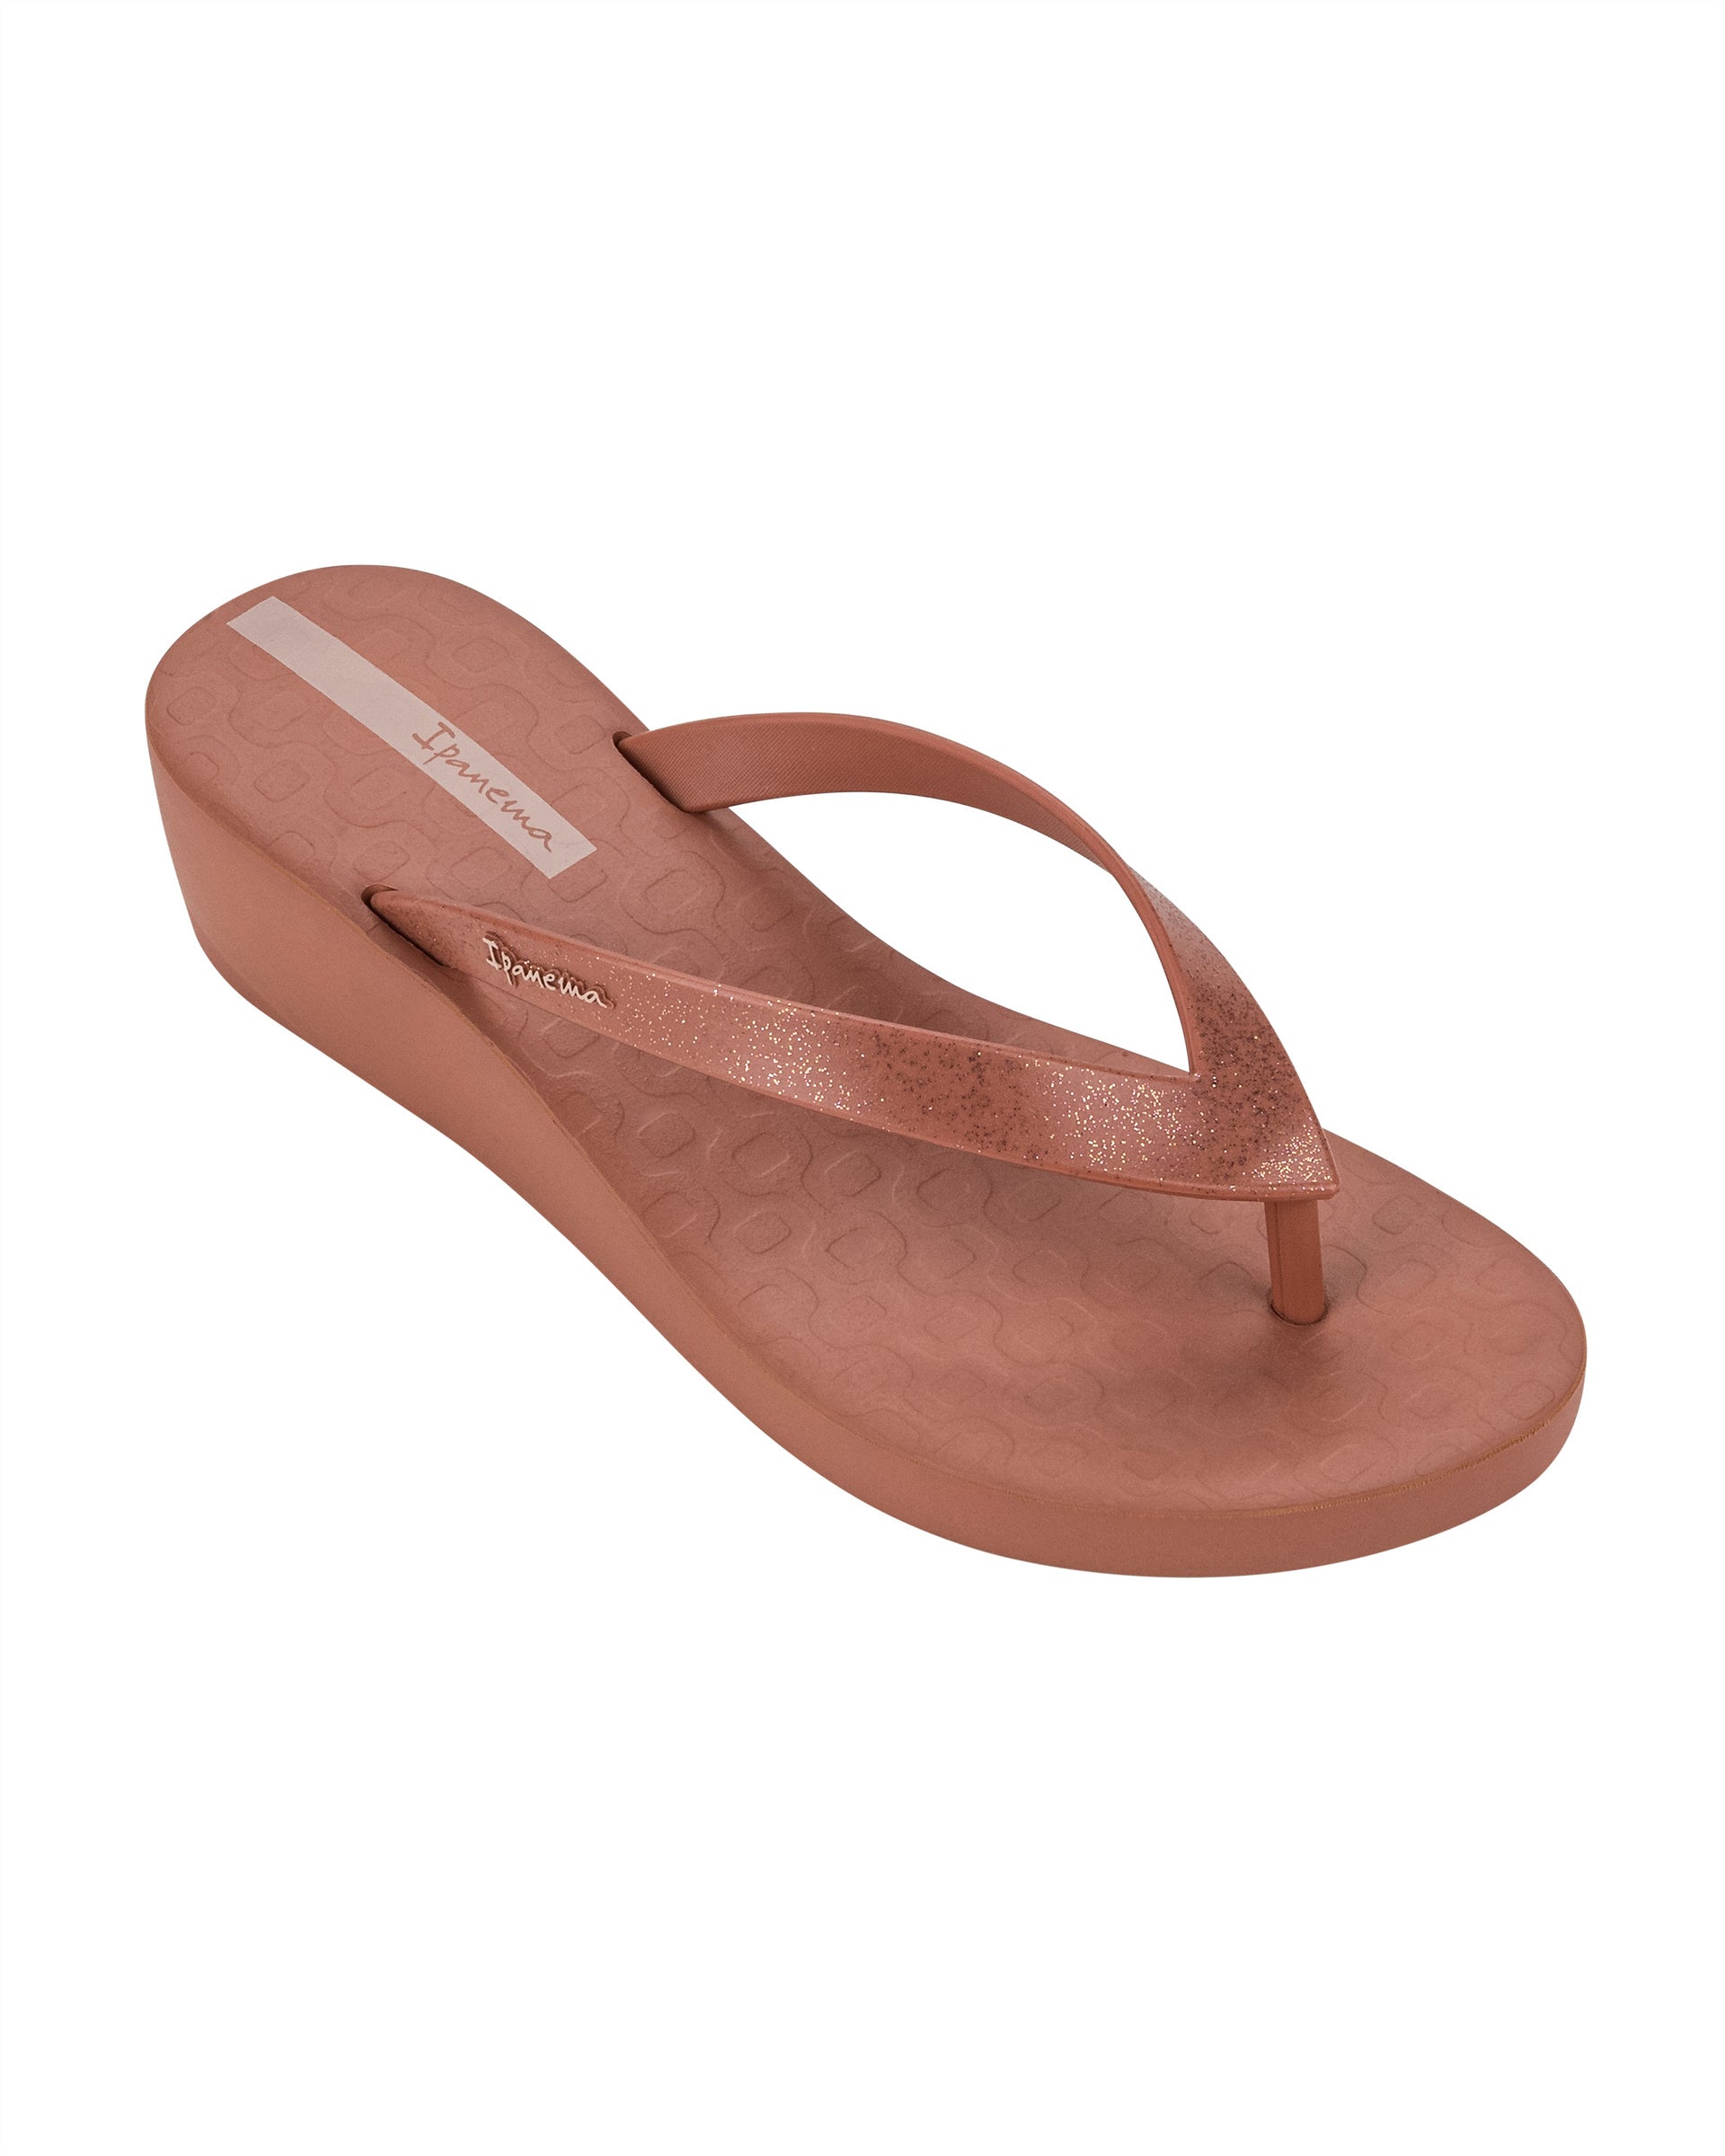 Angled view of a pink Ipanema Selfie women's wedge flip flop with glitter pink straps.